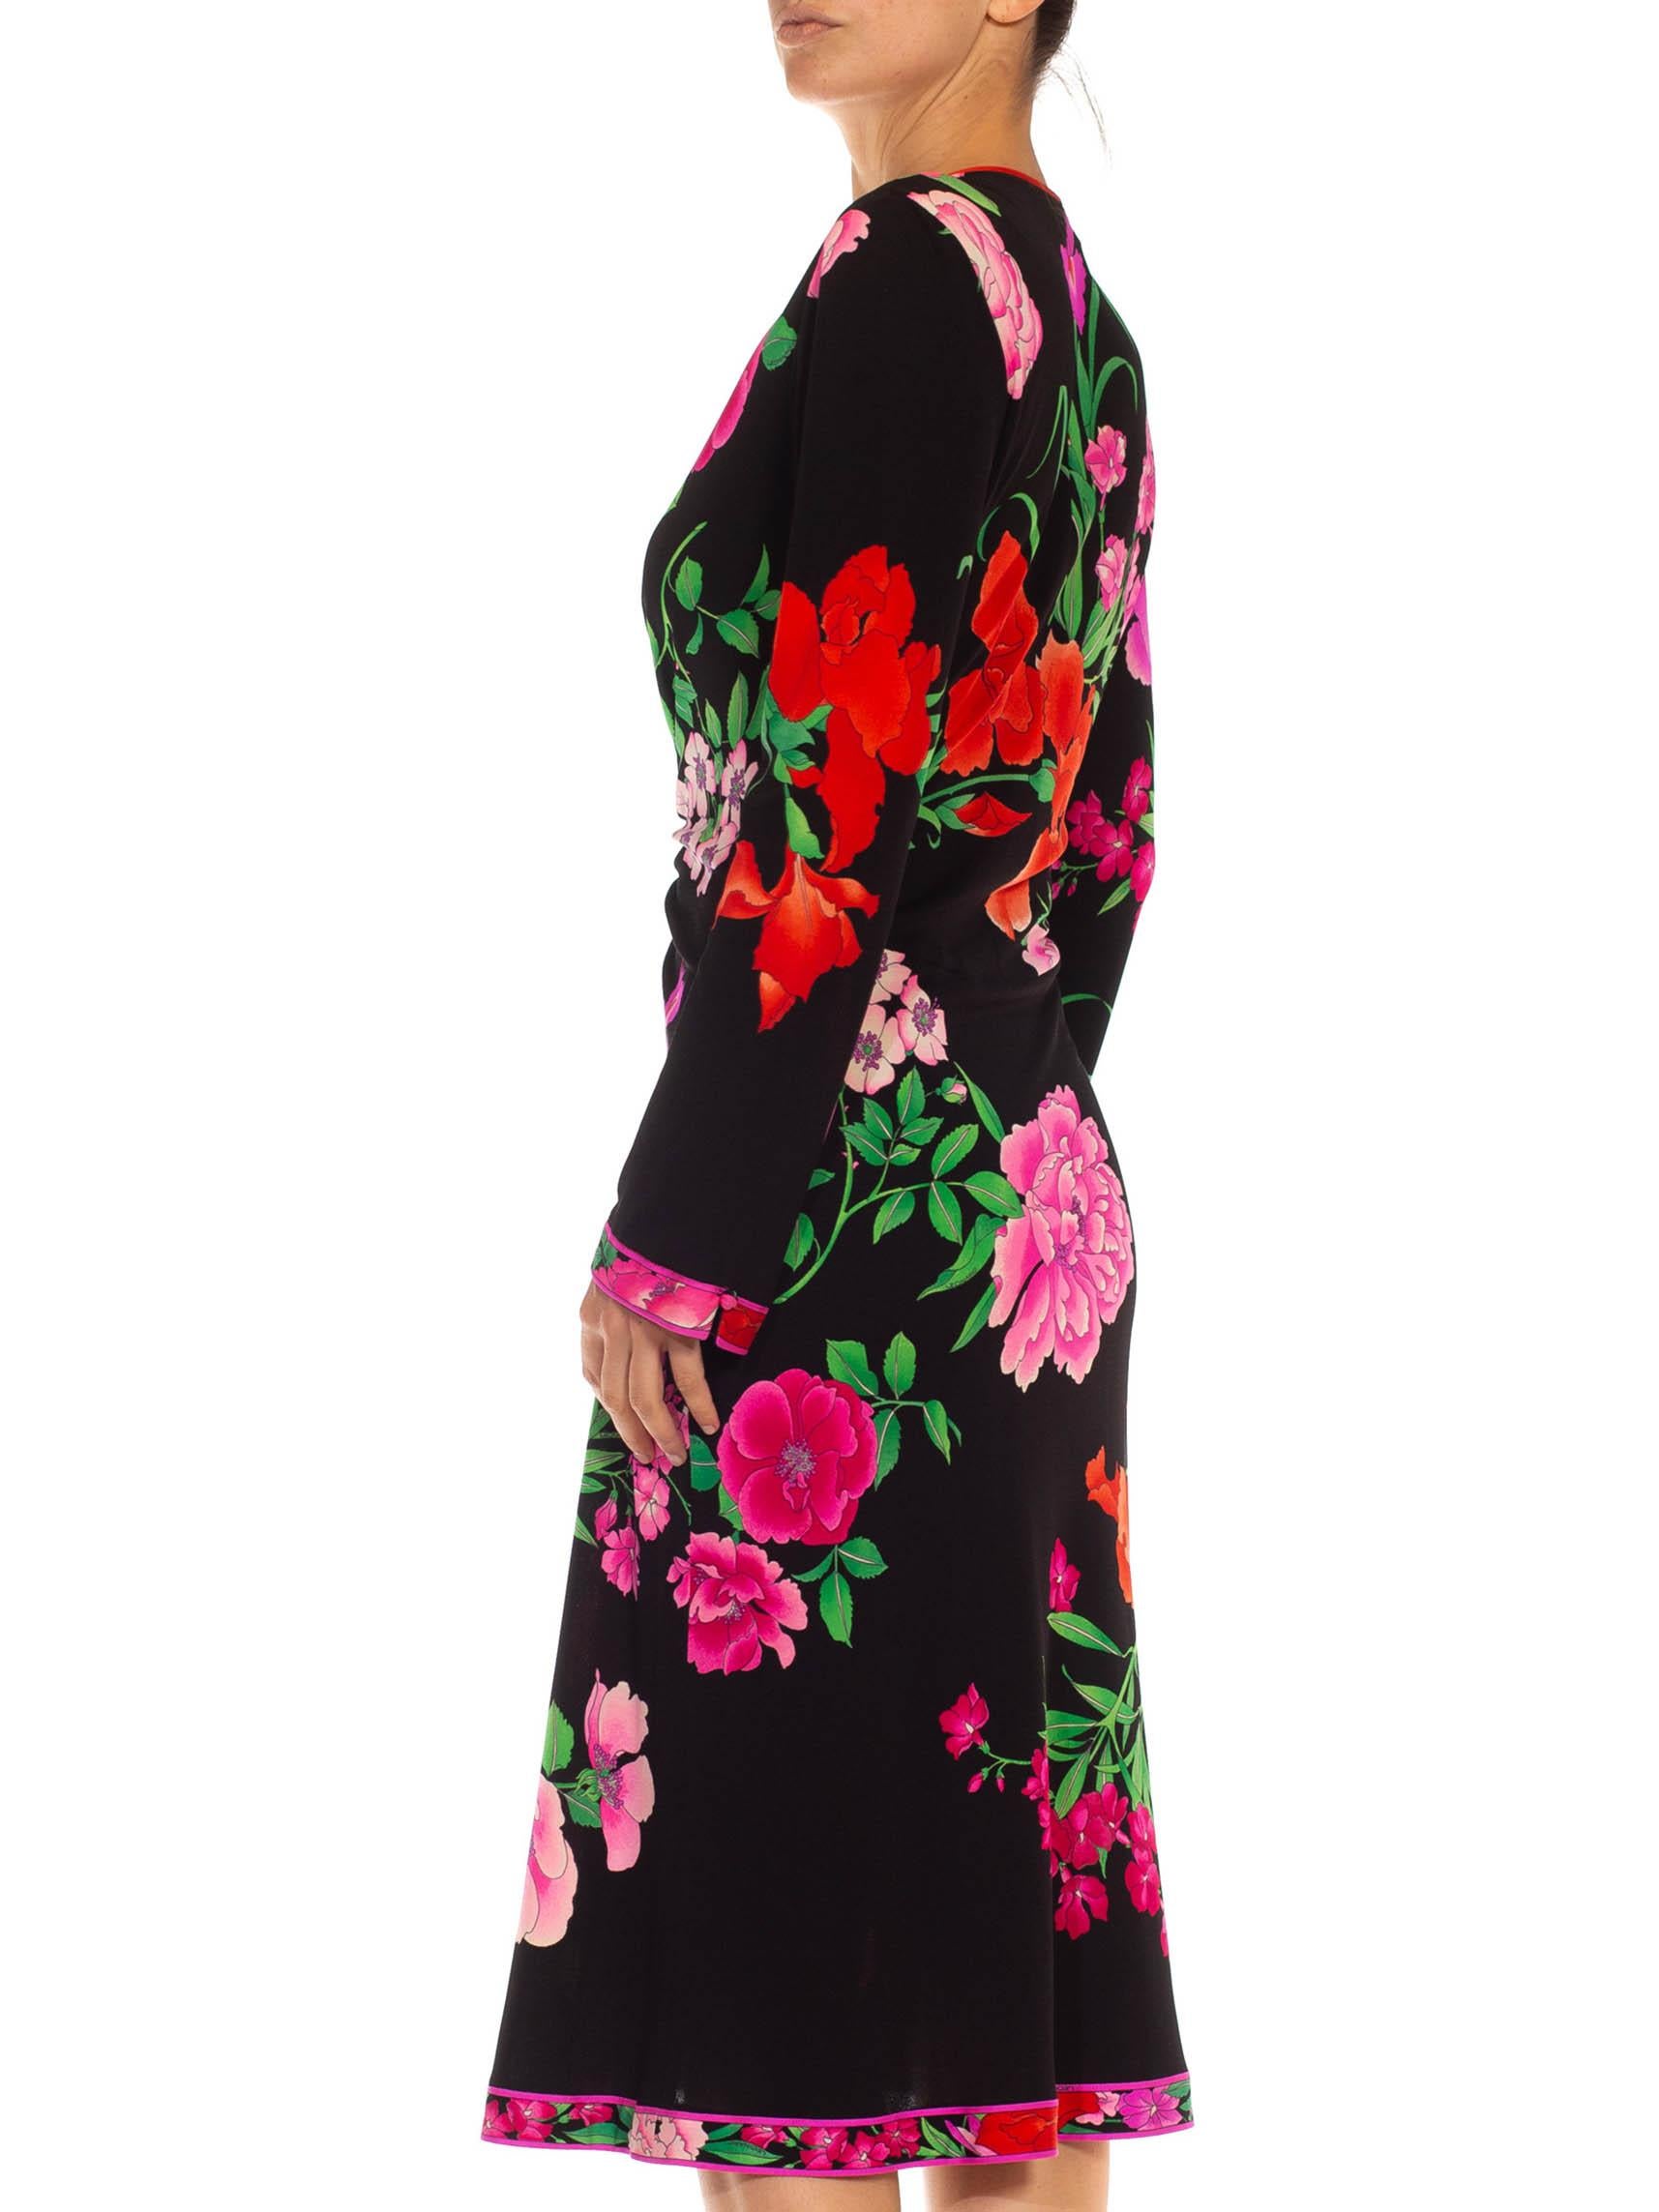 1980S LEONARD Black & Pink Polyester Jersey Front Ruched Floral Dress In Excellent Condition For Sale In New York, NY